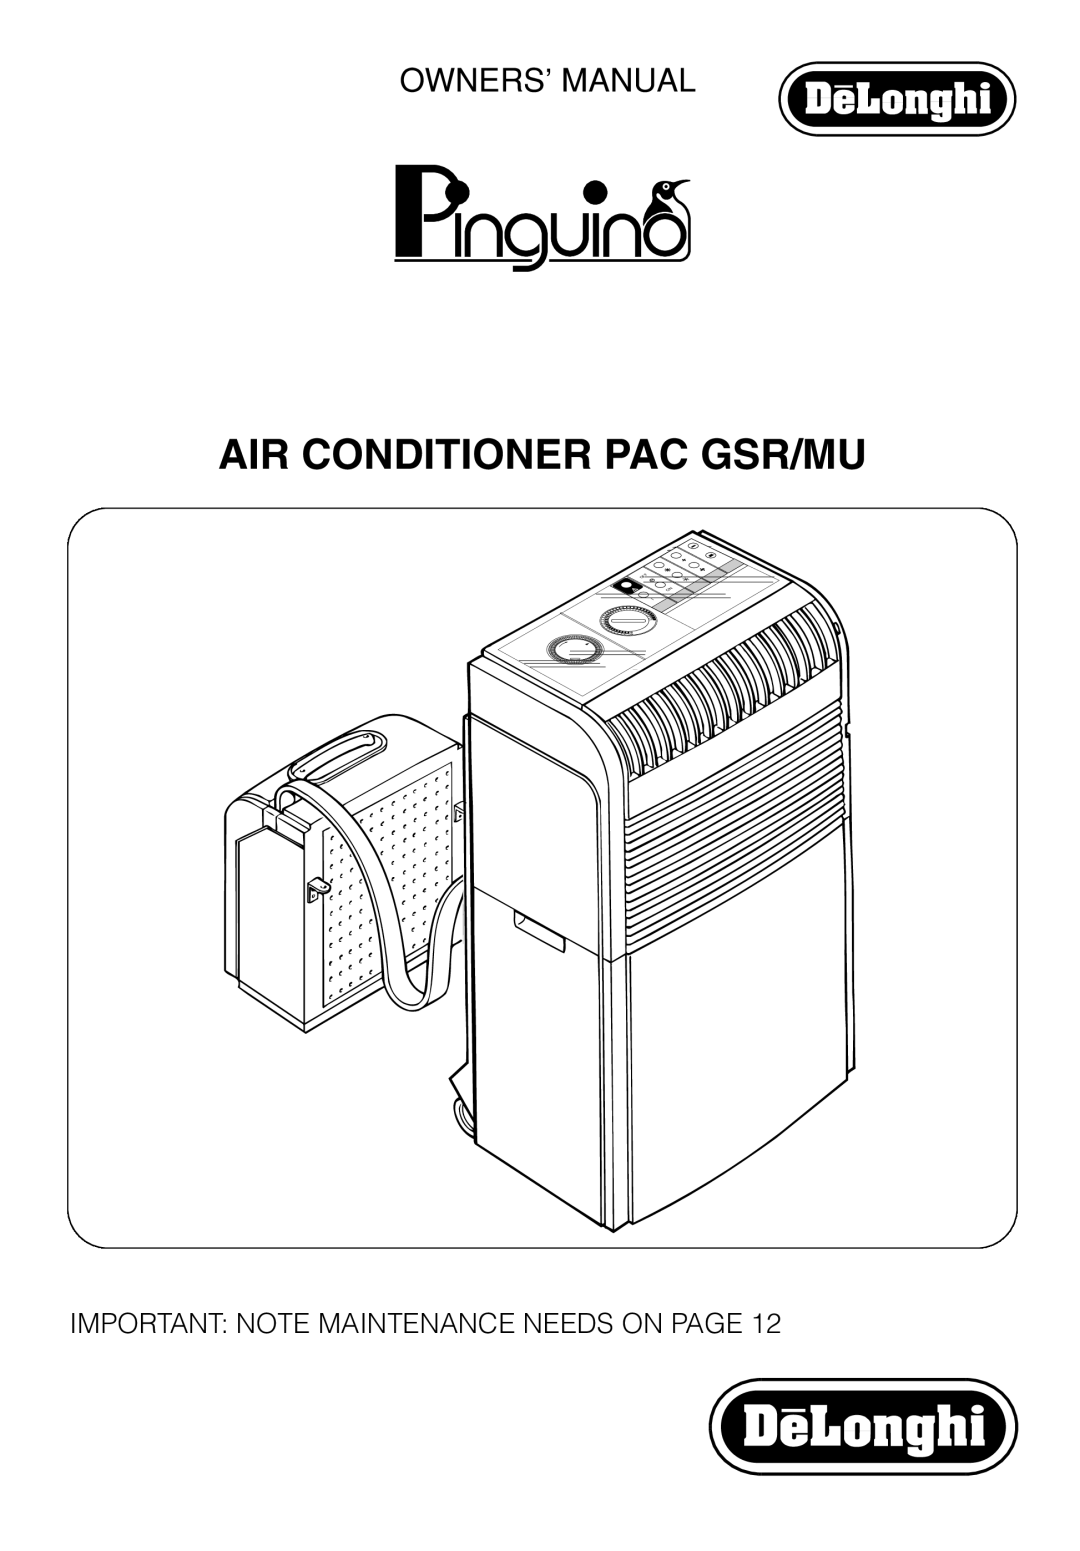 DeLonghi PAC GSR/MU owner manual Air Conditioner Pac Gsr/Mu, Owners’ Manual, Important Note Maintenance Needs On Page 